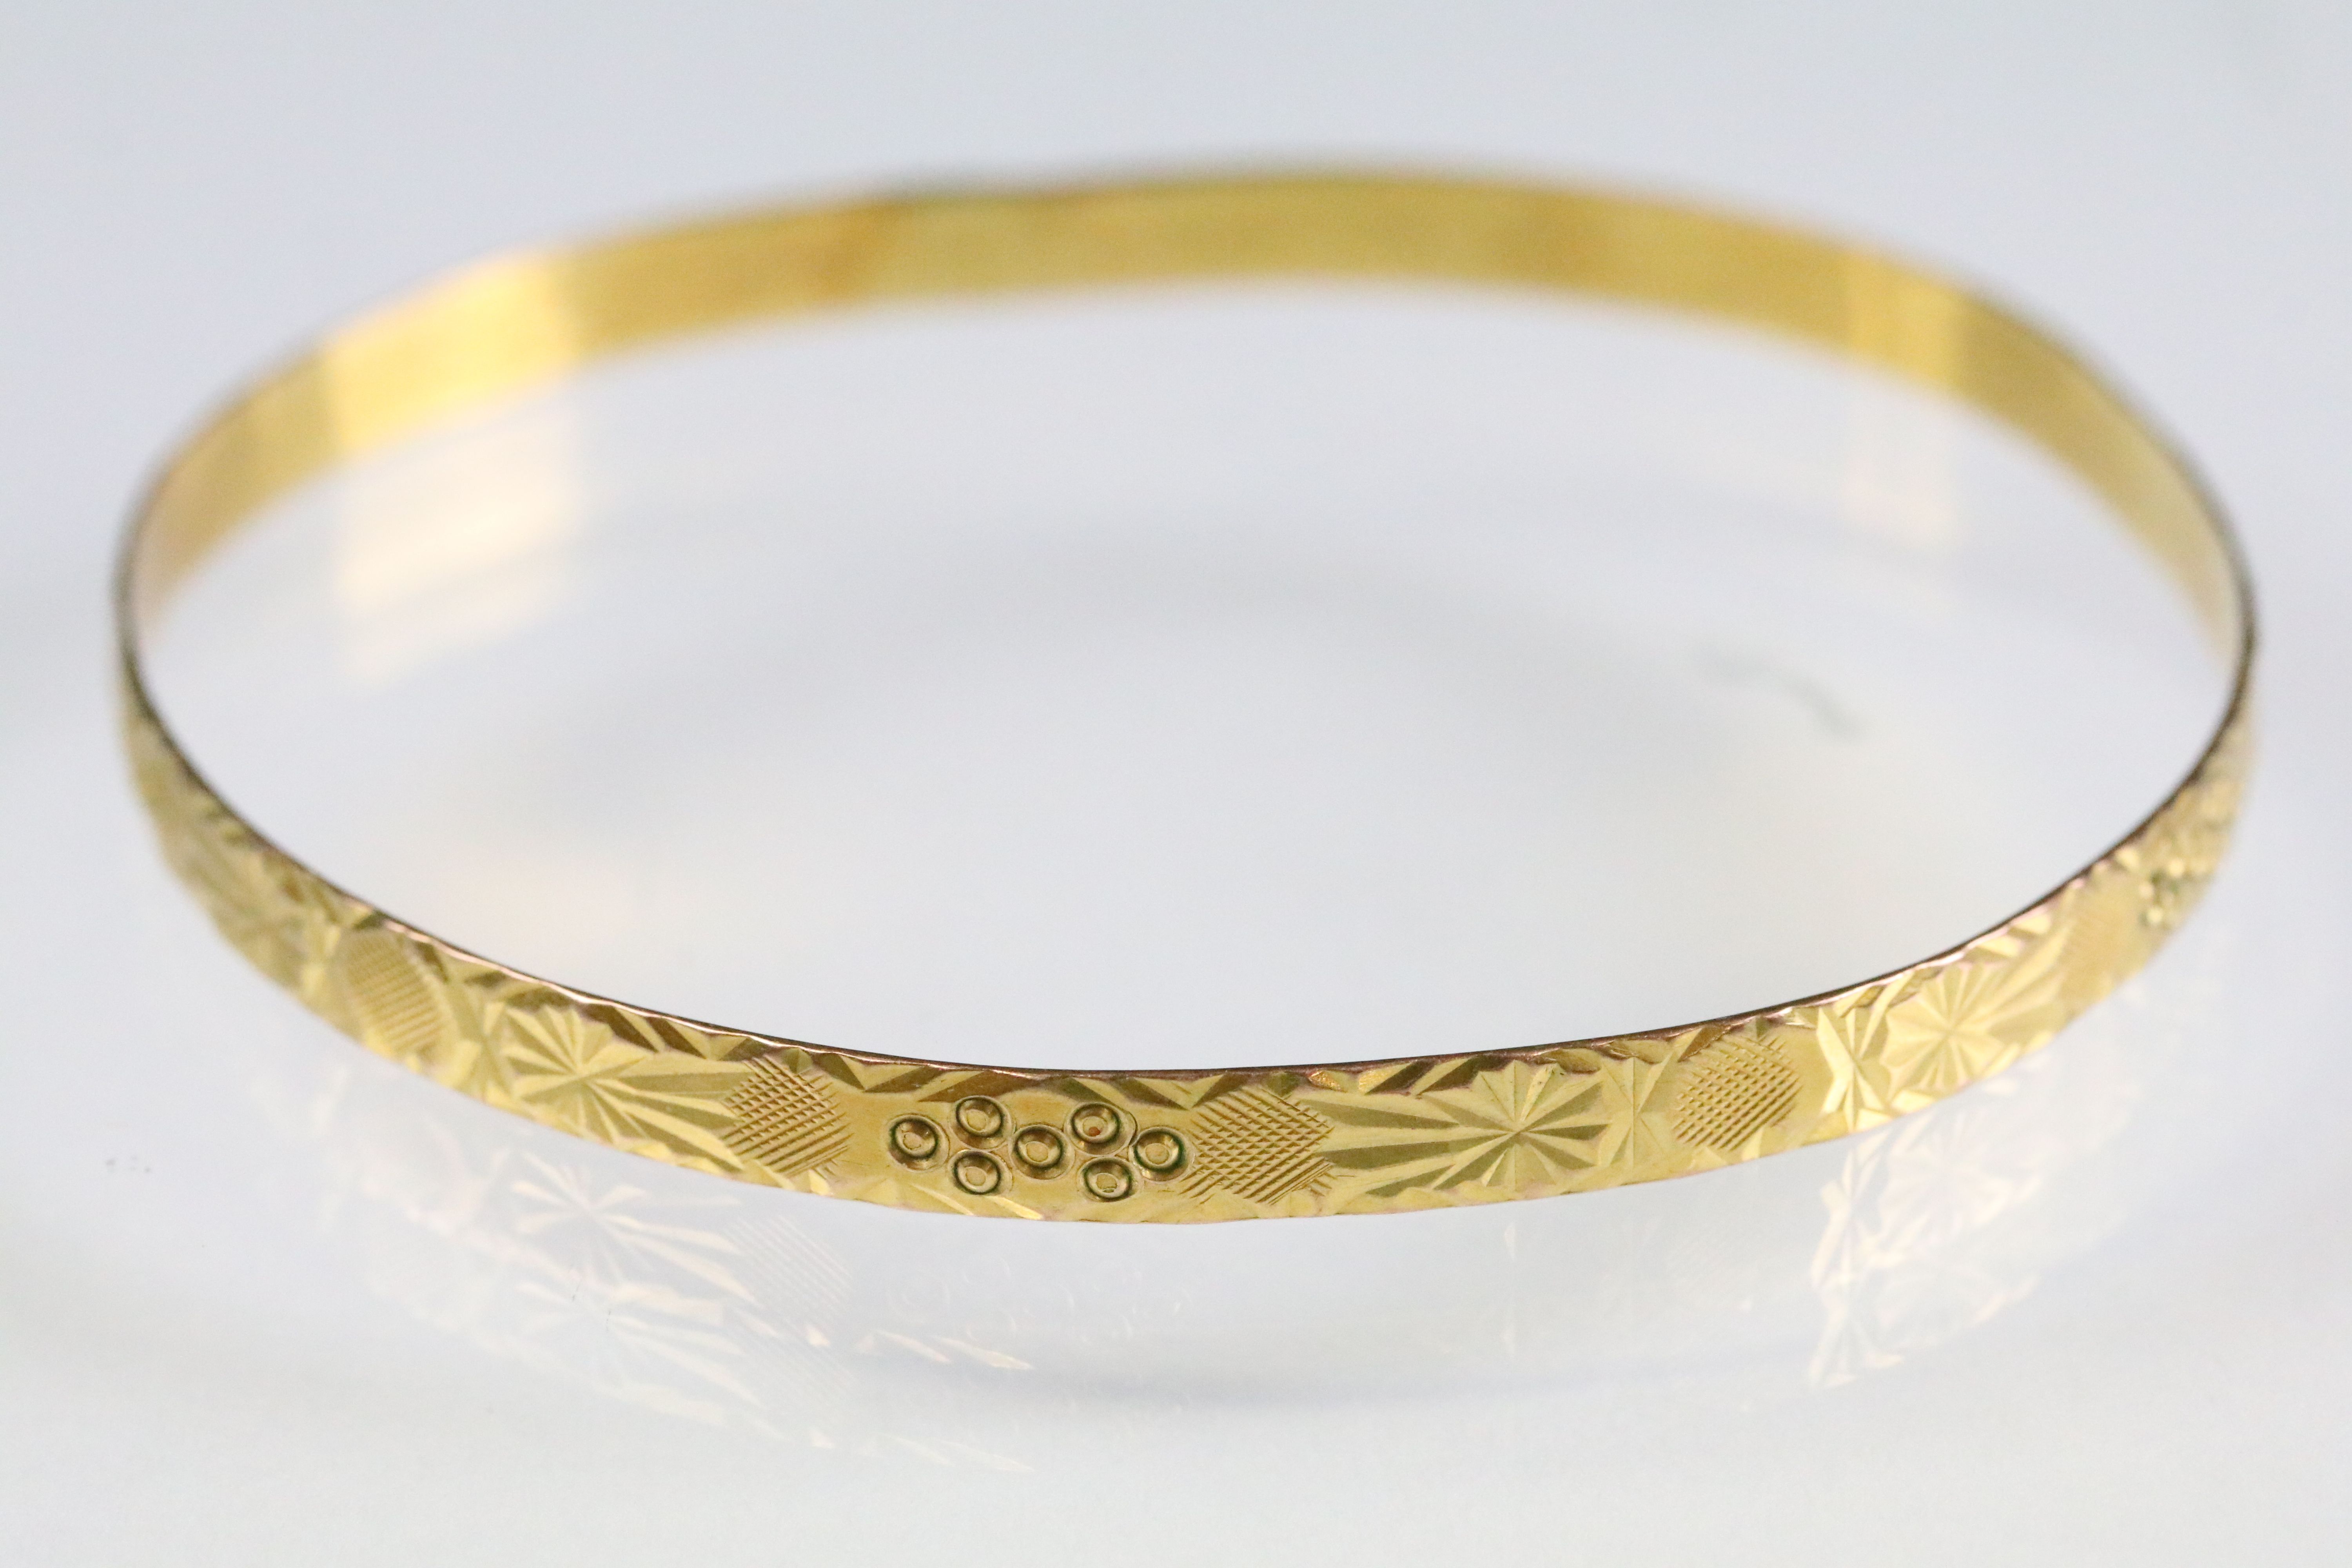 Incised closed bangle bracelet with geometric details. Yellow metal marked 22. Measures 6cm wide. - Image 2 of 4